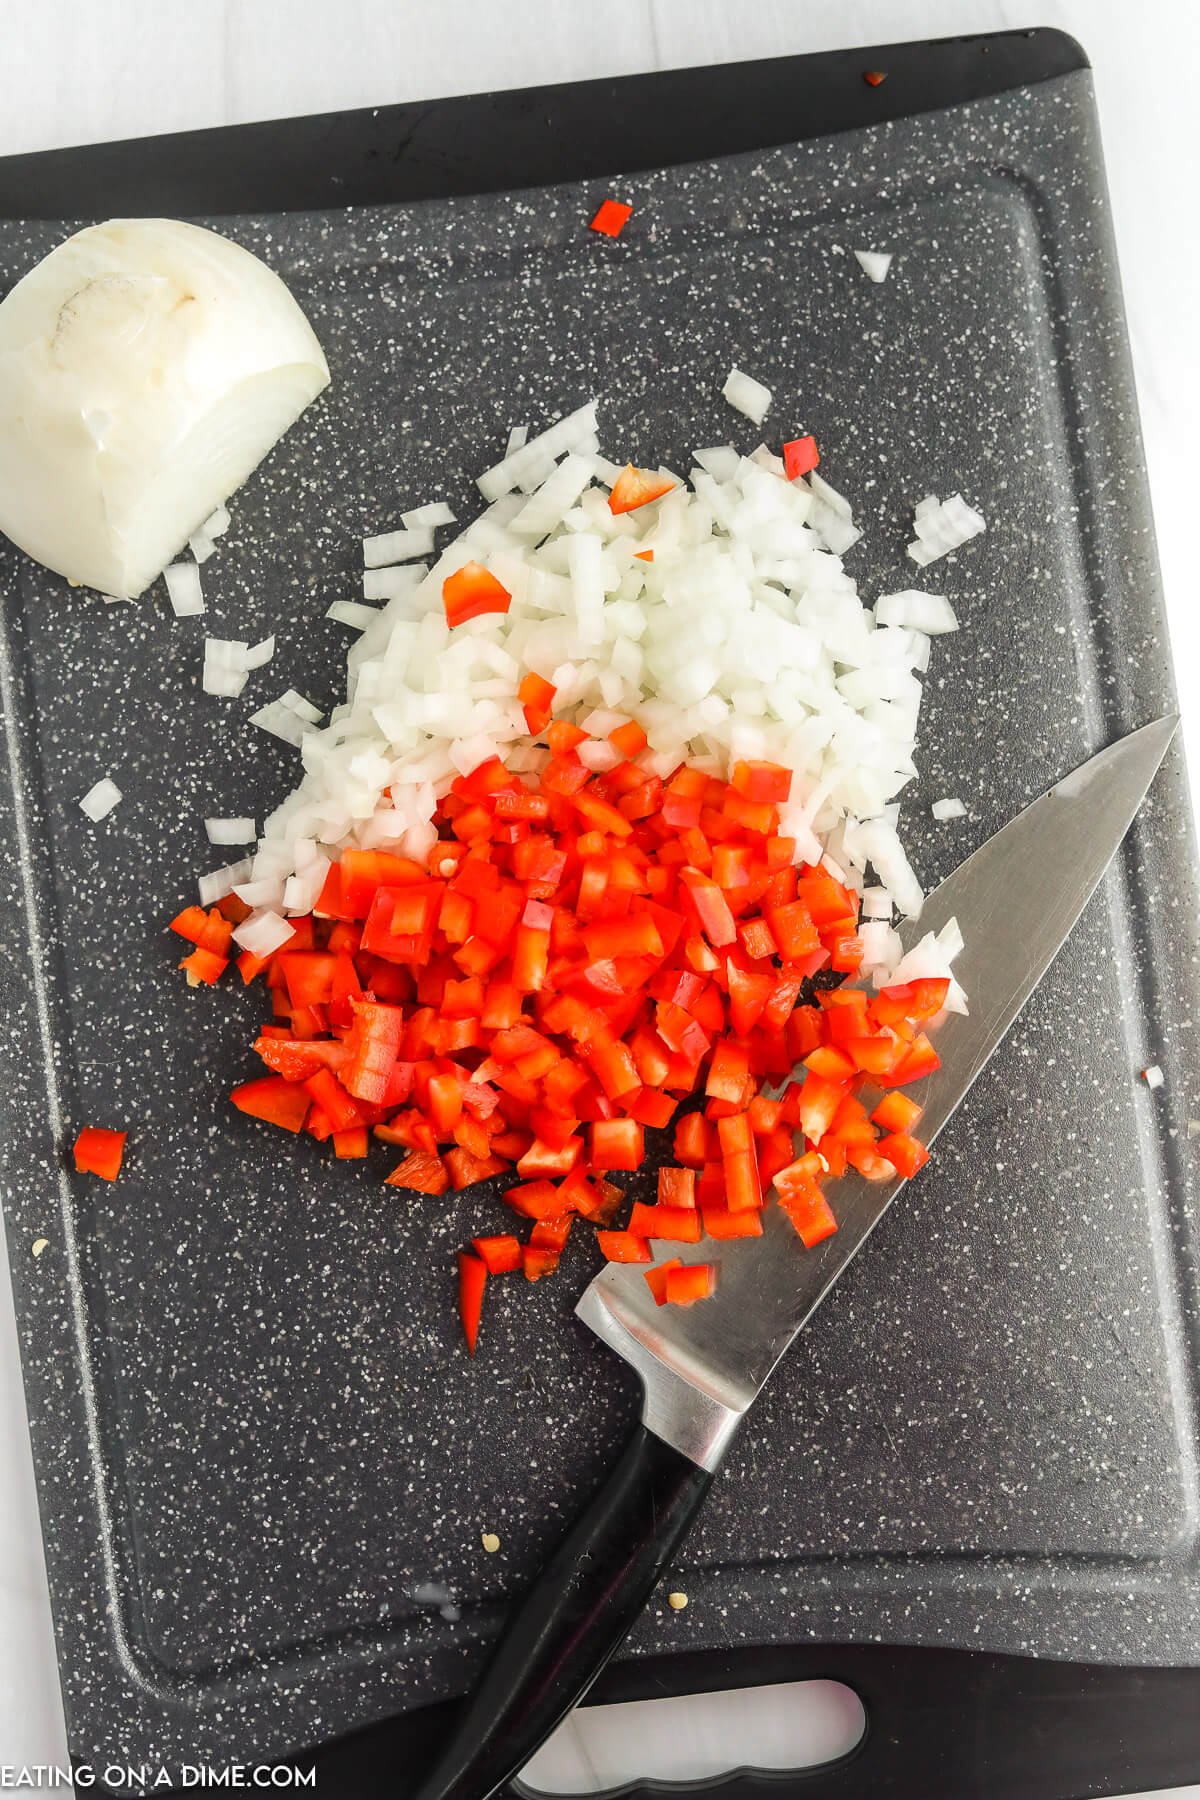 Chopping the red bell peppers and onions on a cutting board with a knife